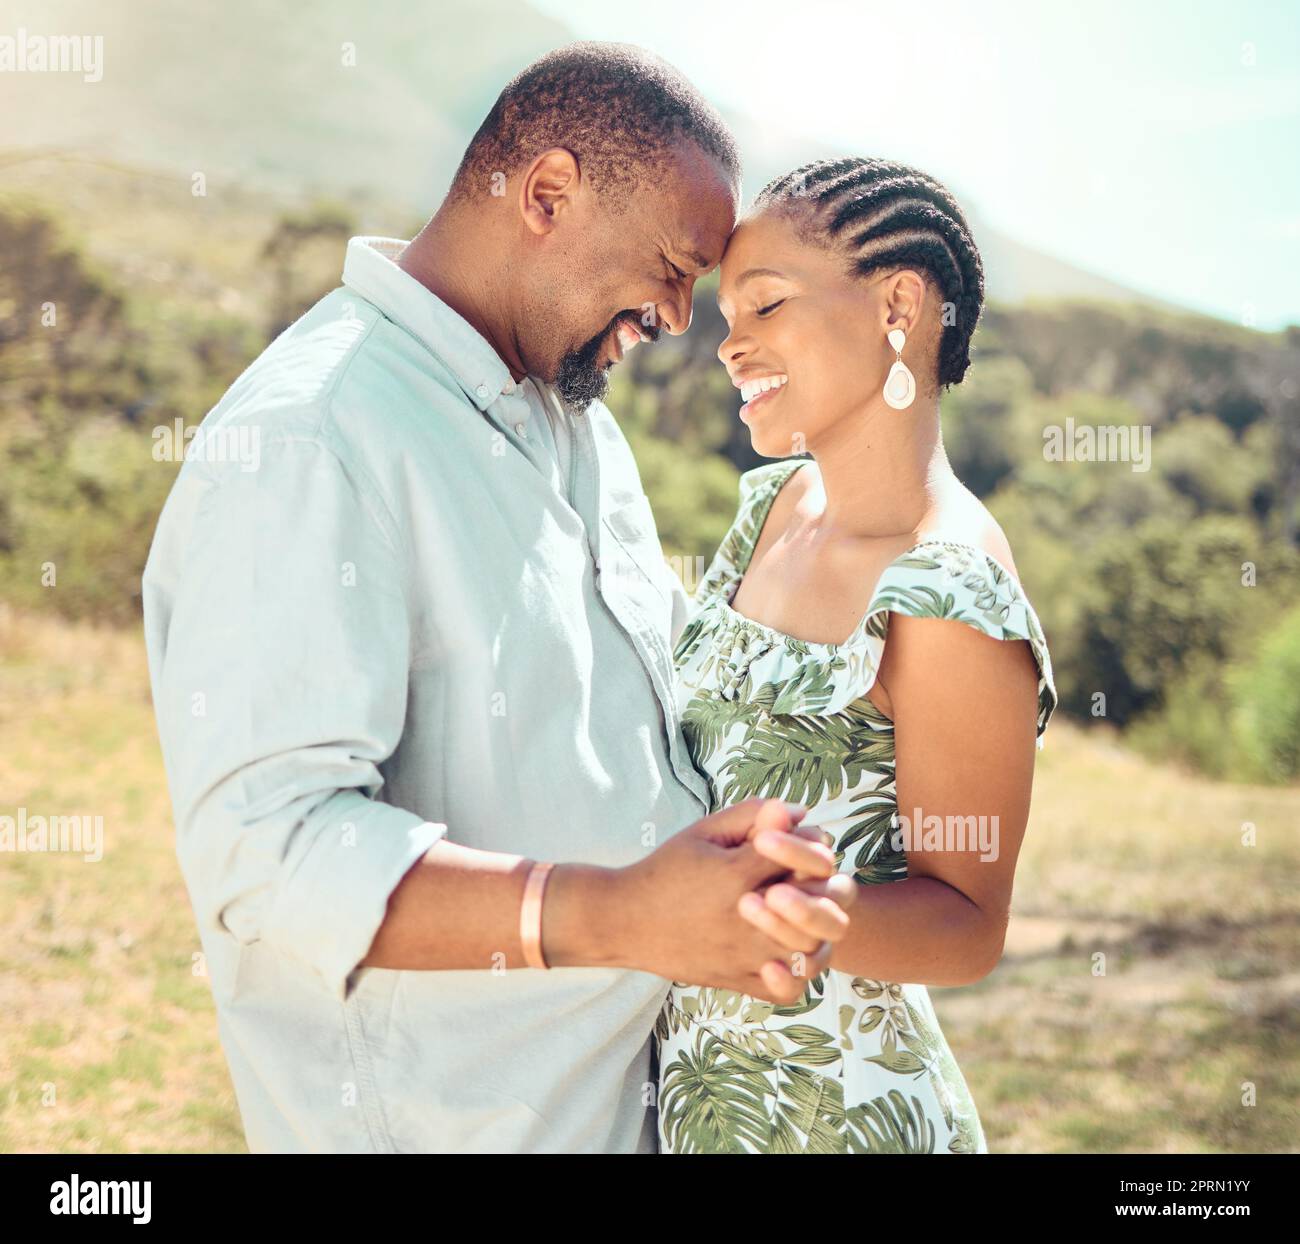 Black couple dancing in garden, park or nature together outdoors for love, relax and playful fun. African people, partners on a date and happy romantic marriage, intimate dance and care relationship Stock Photo